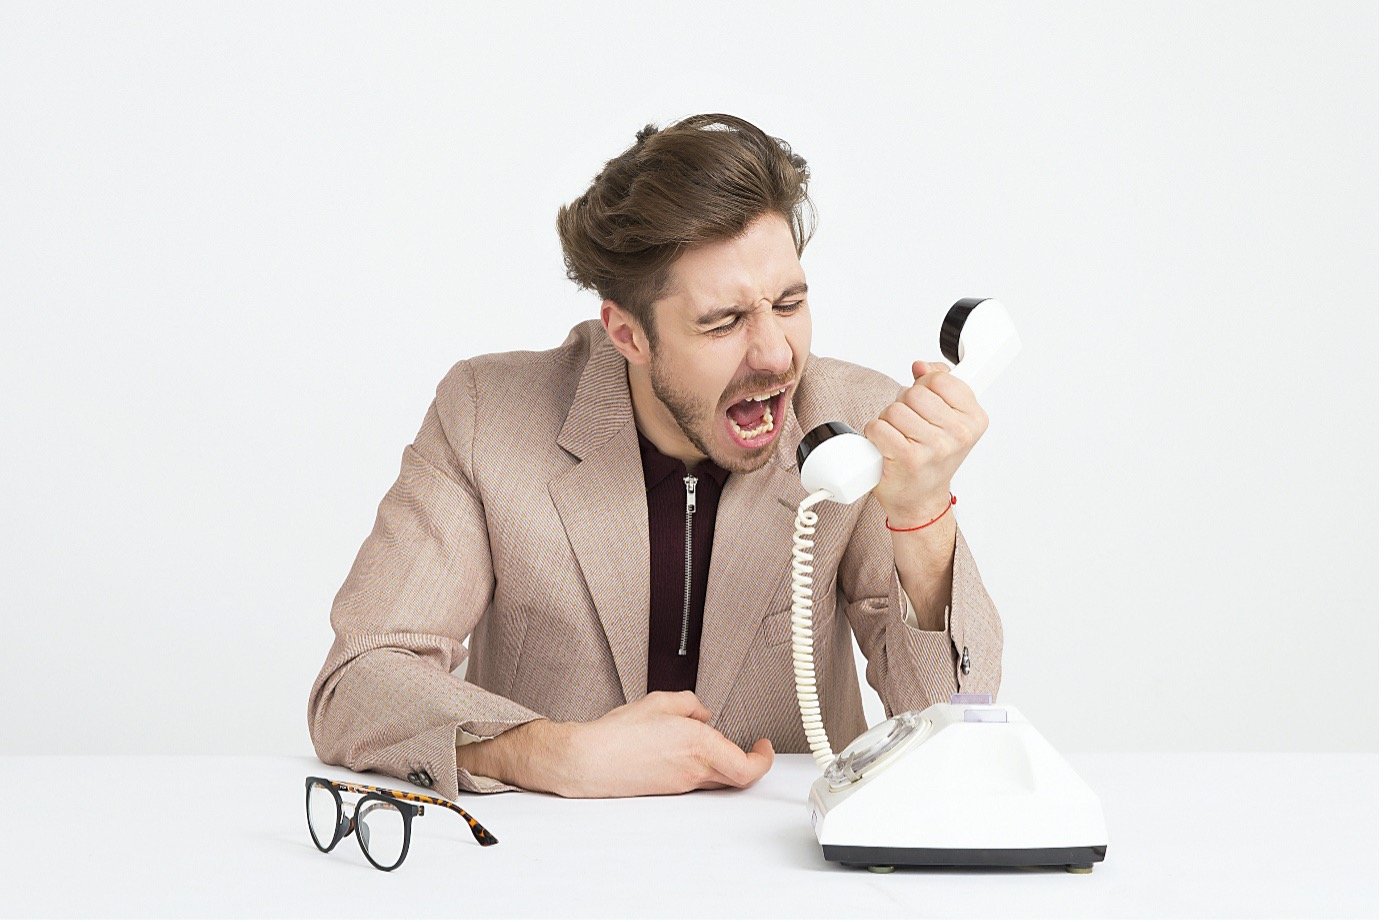 Tips for Dealerships to Avoid Their Calls Being Classified as Spam or Unbranded